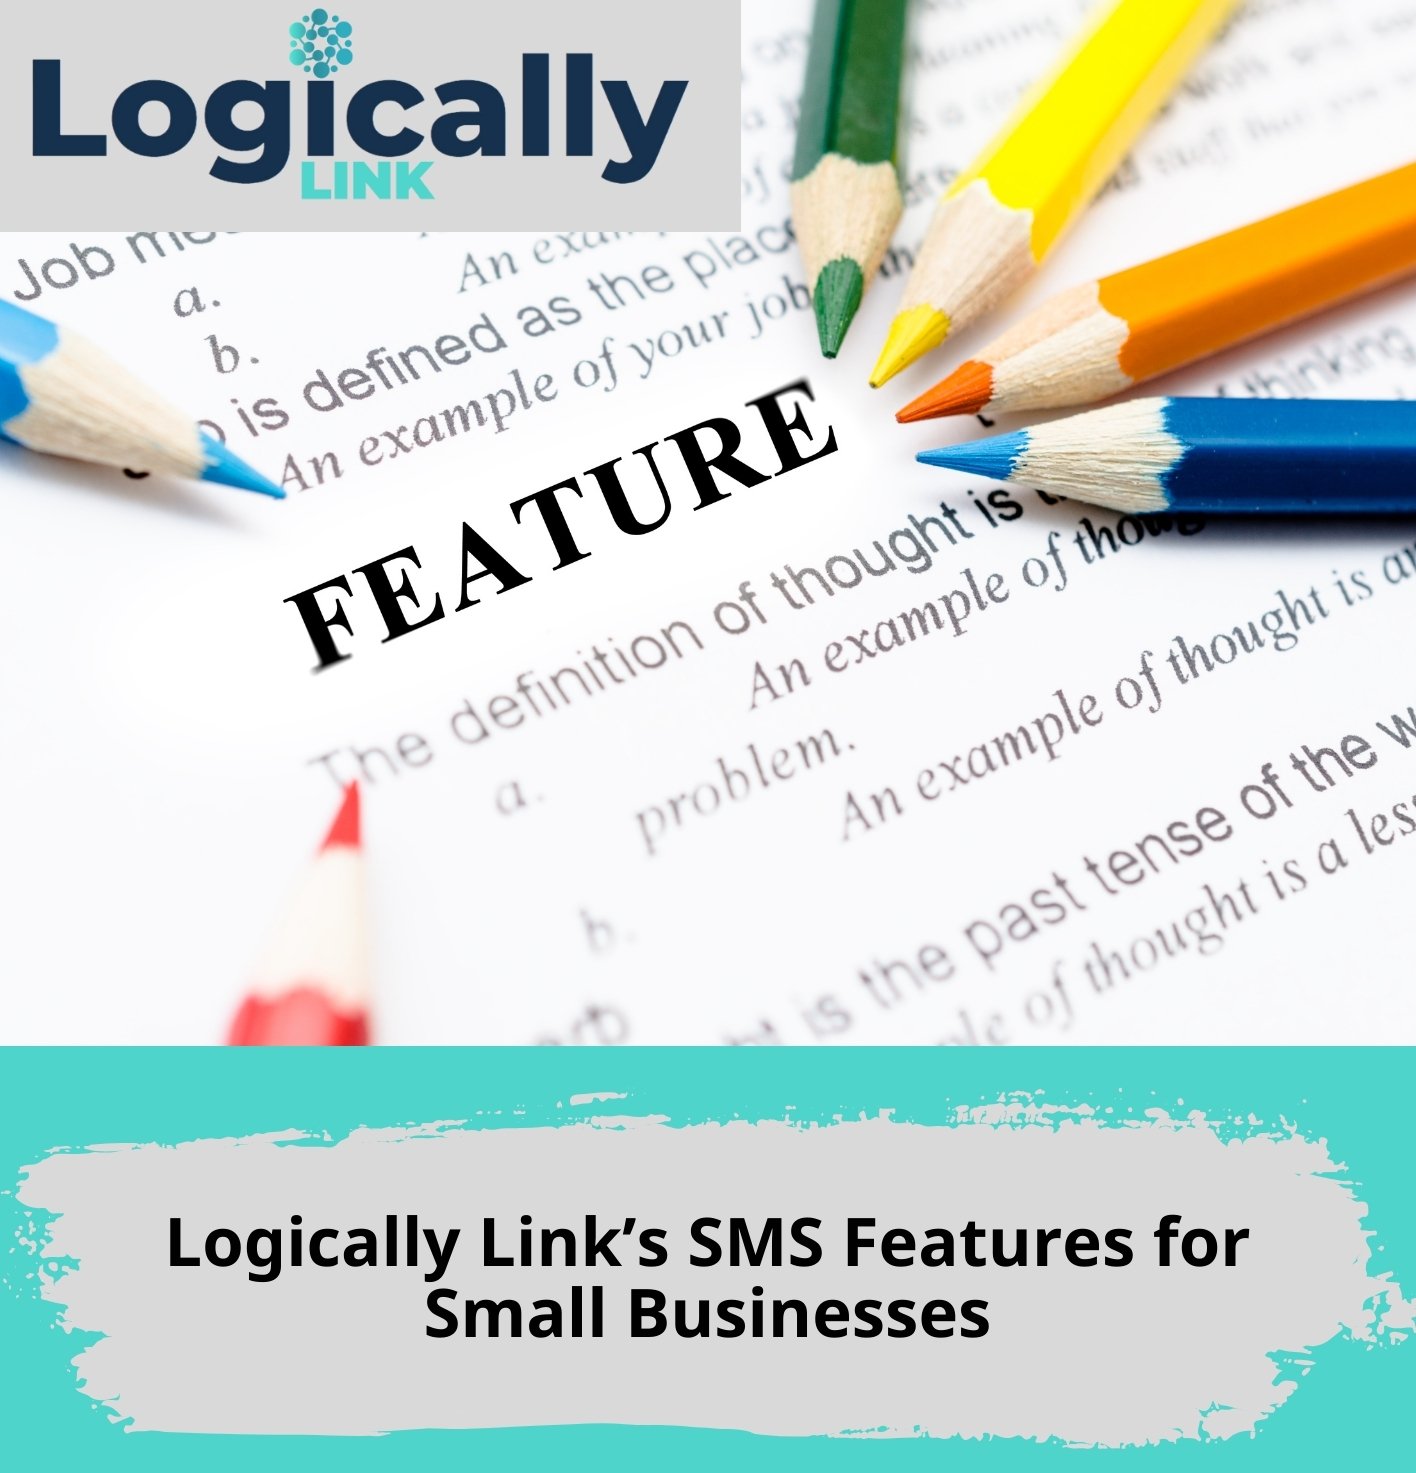 Logically Link’s SMS Features for Small Businesses